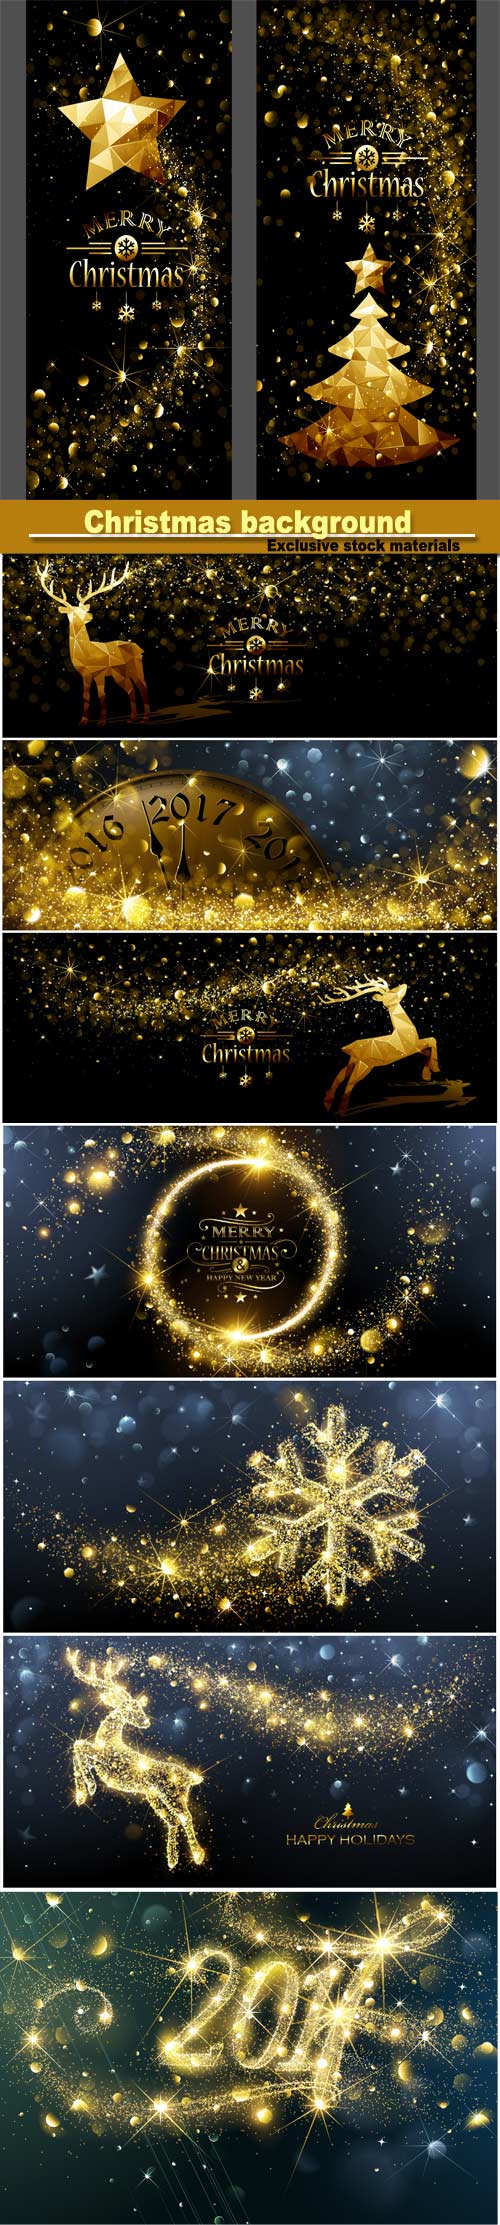 Beautiful Christmas background with glowing elements, deer, tree